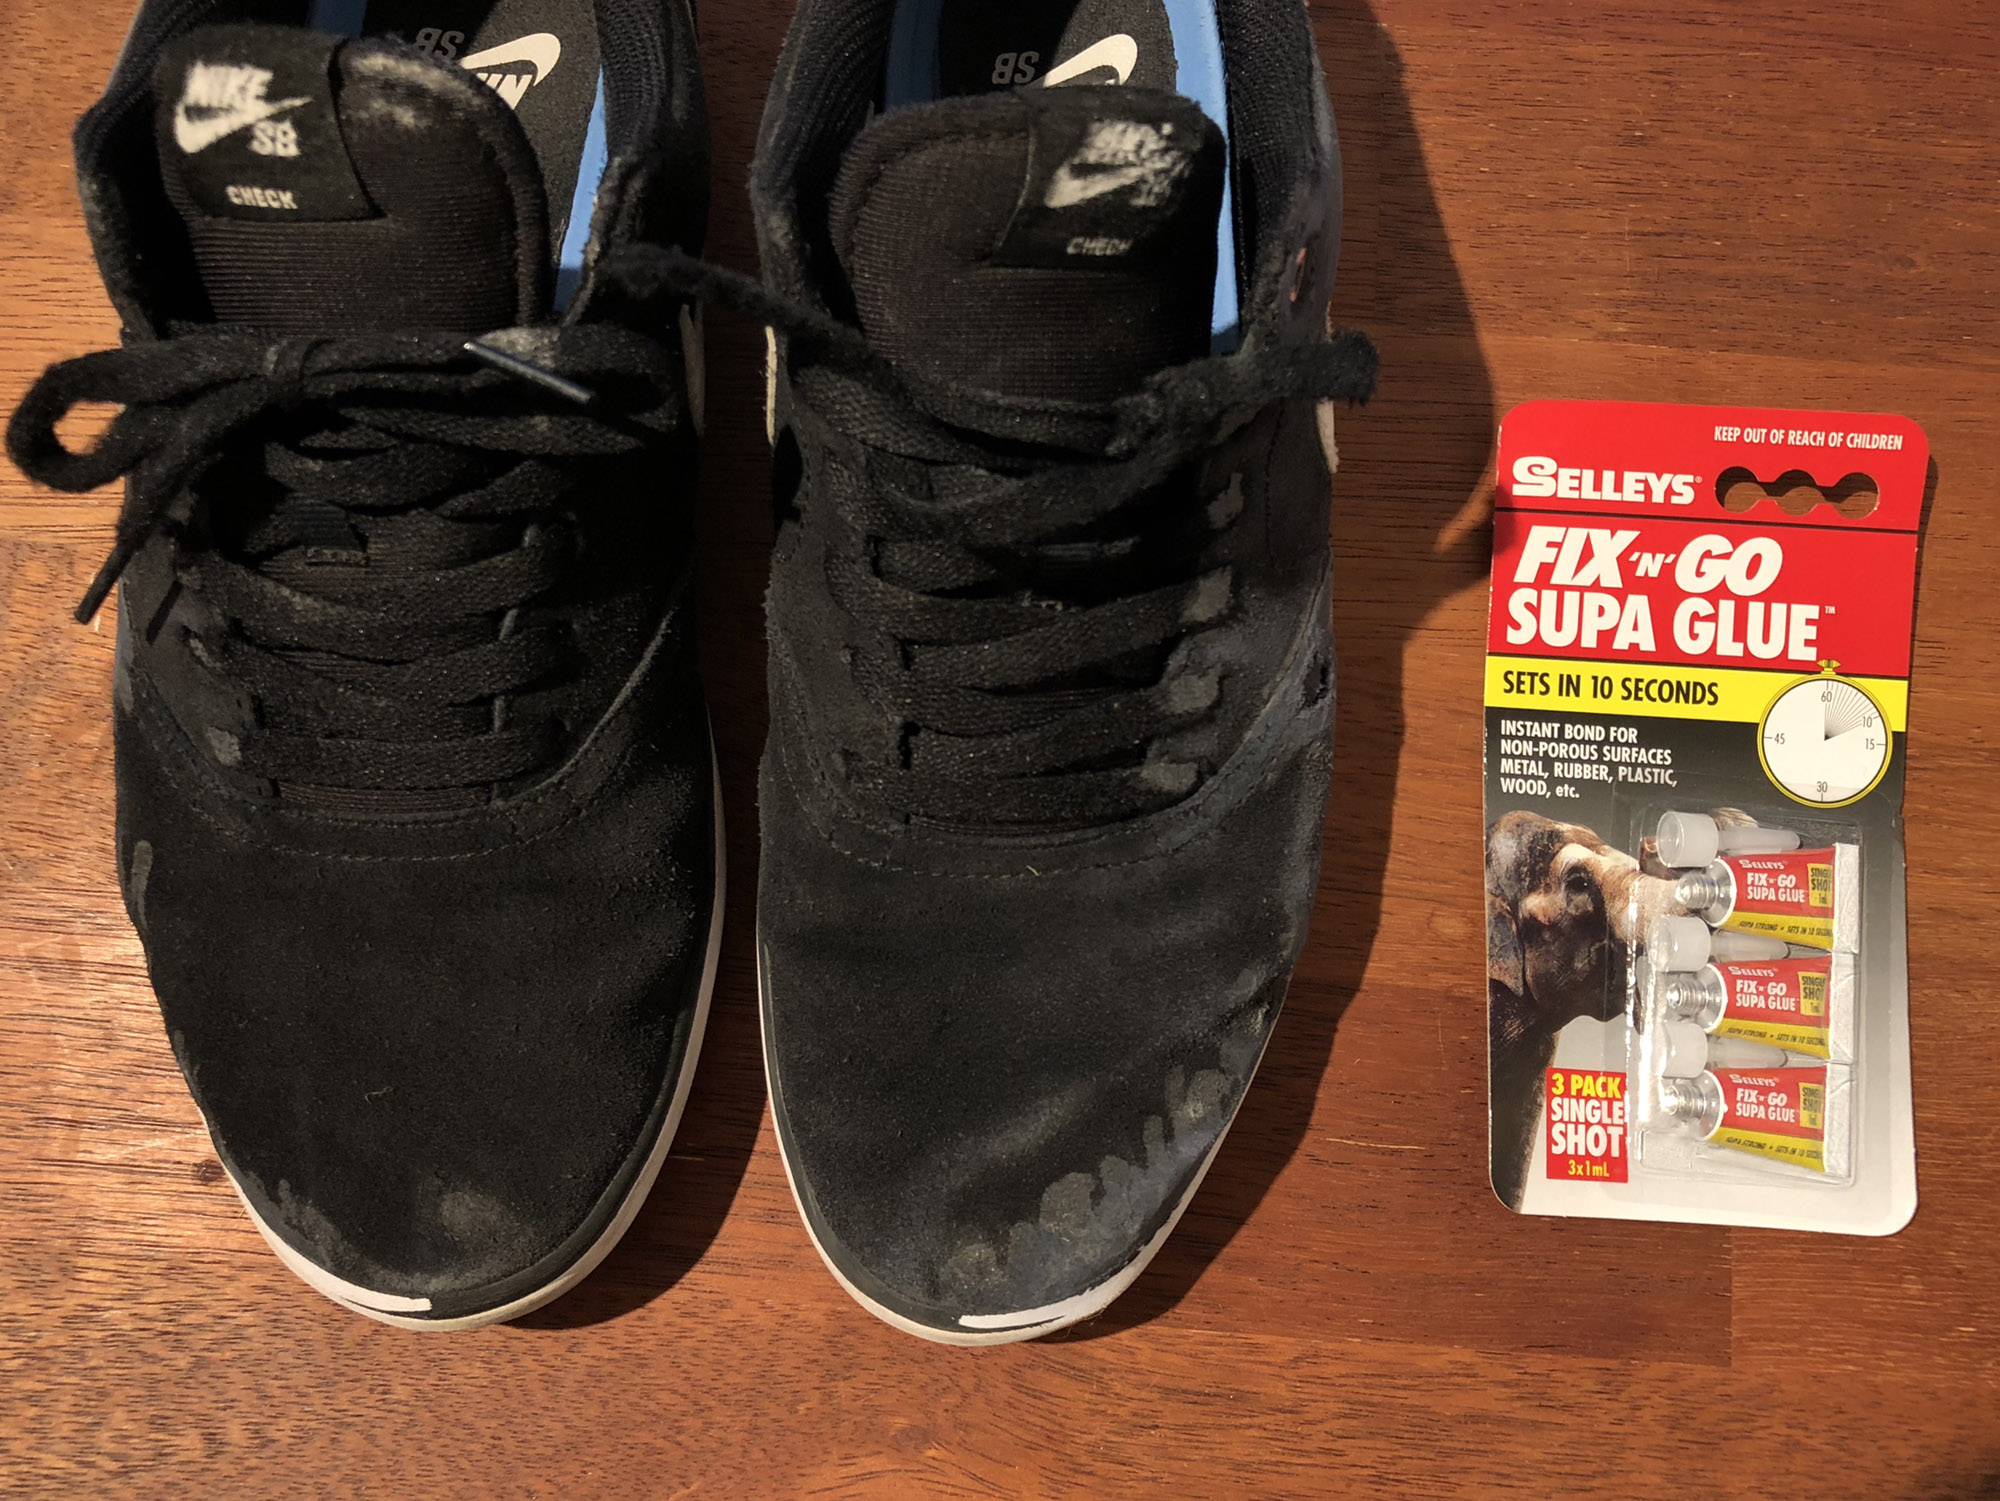 How To Your Skate Shoes Last Longer — How To Skate High Online Skateboard Coaching